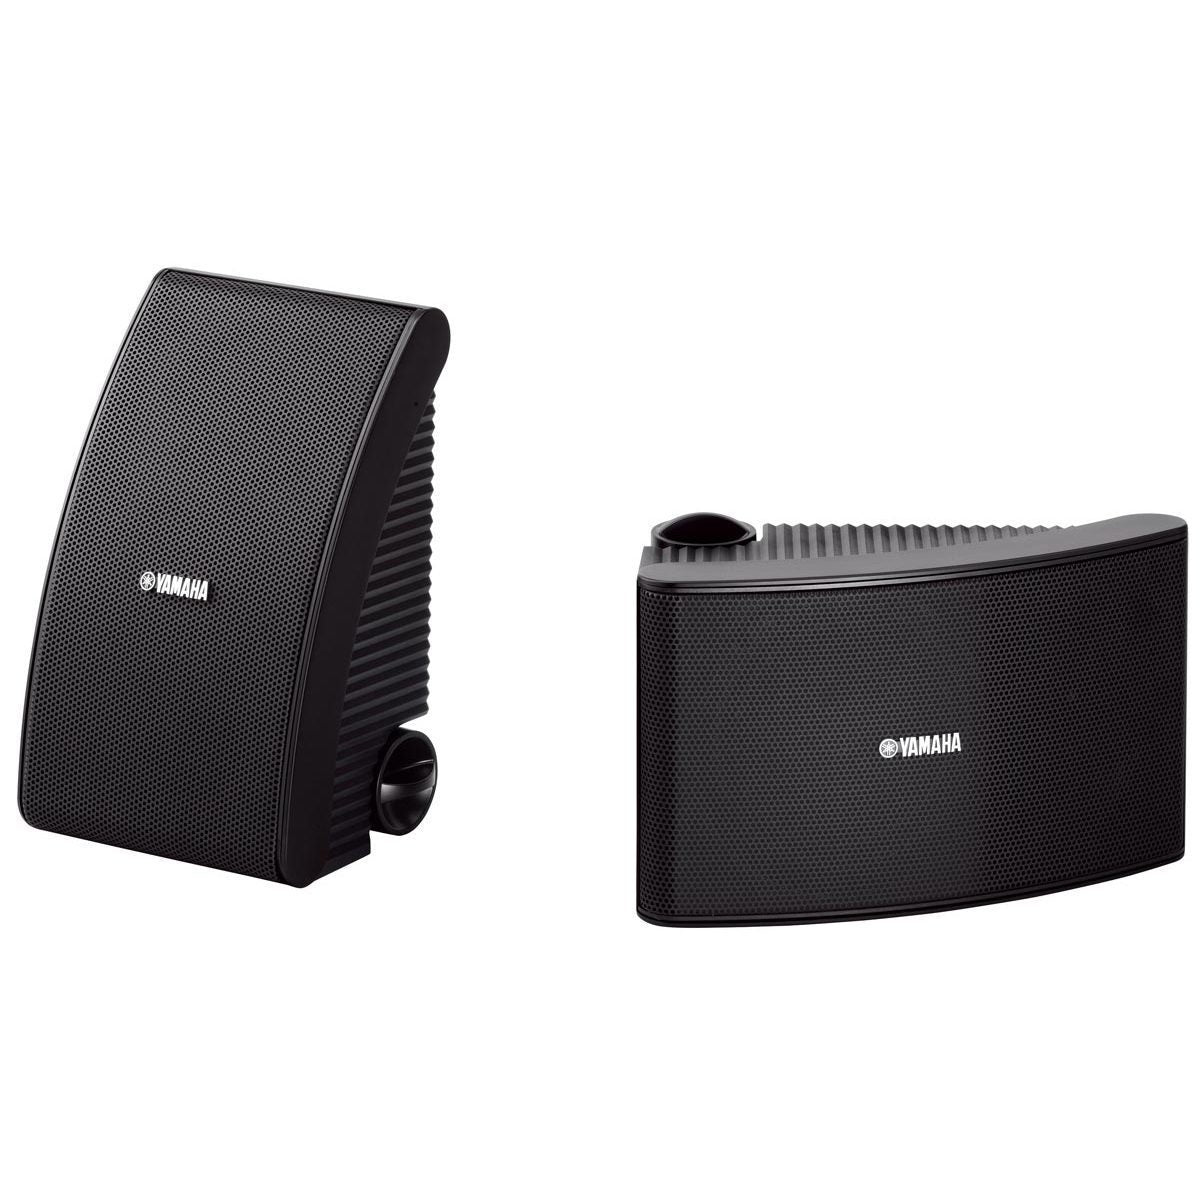 Yamaha NSAW392 All-Weather Outdoor Speakers